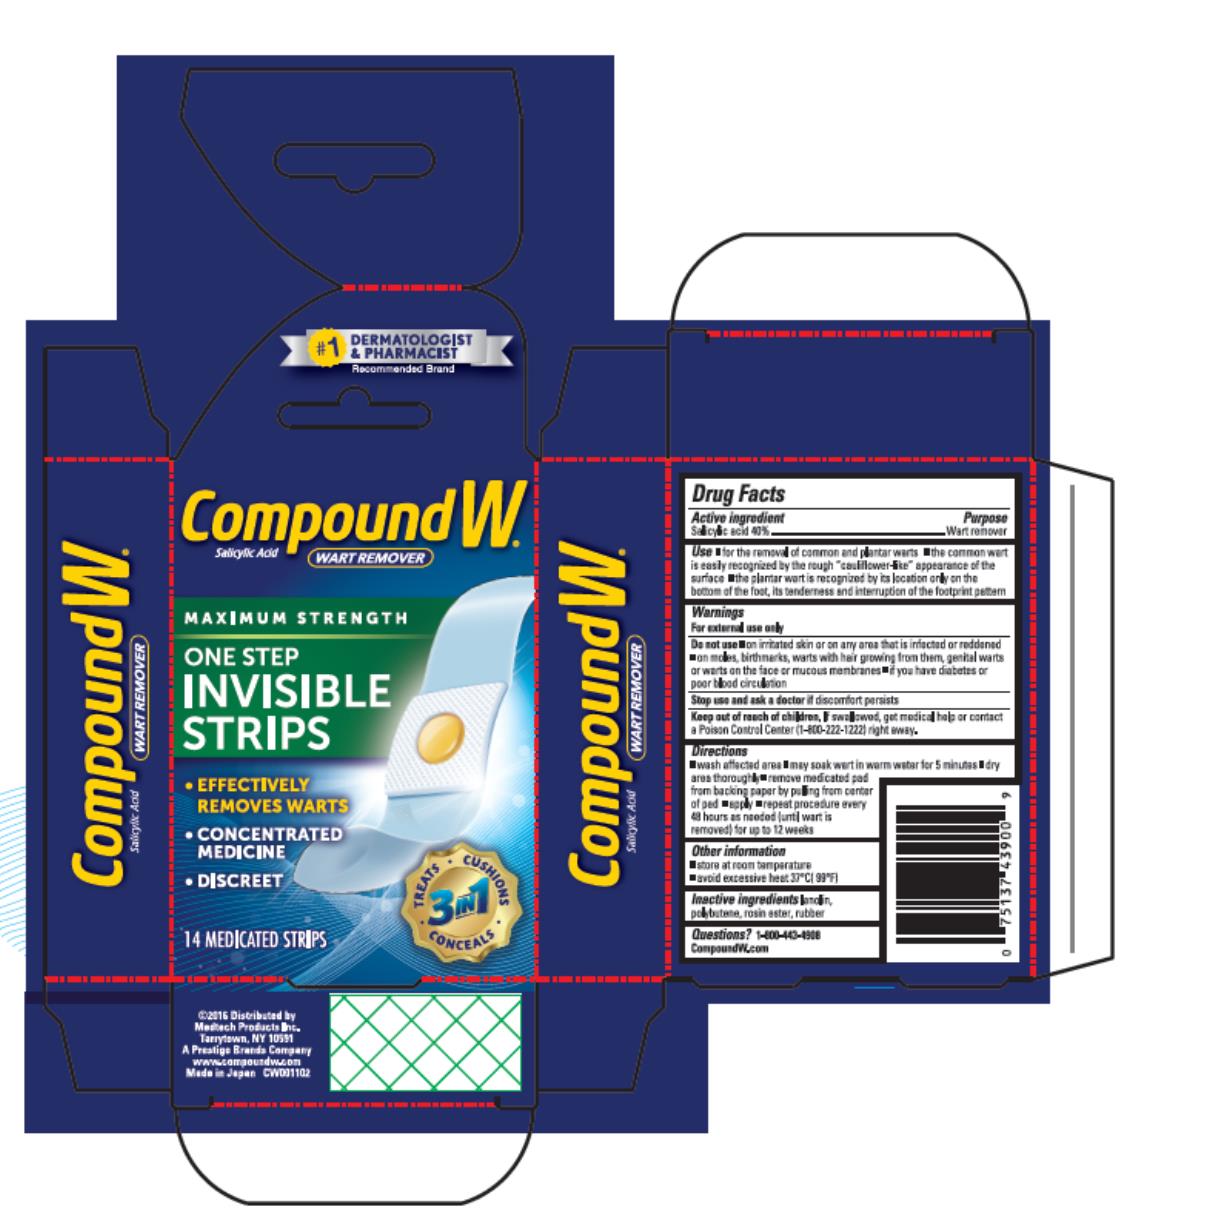 PRINCIPAL DISPLAY PANEL 
Compound W
Wart remover
14 medicated strips
